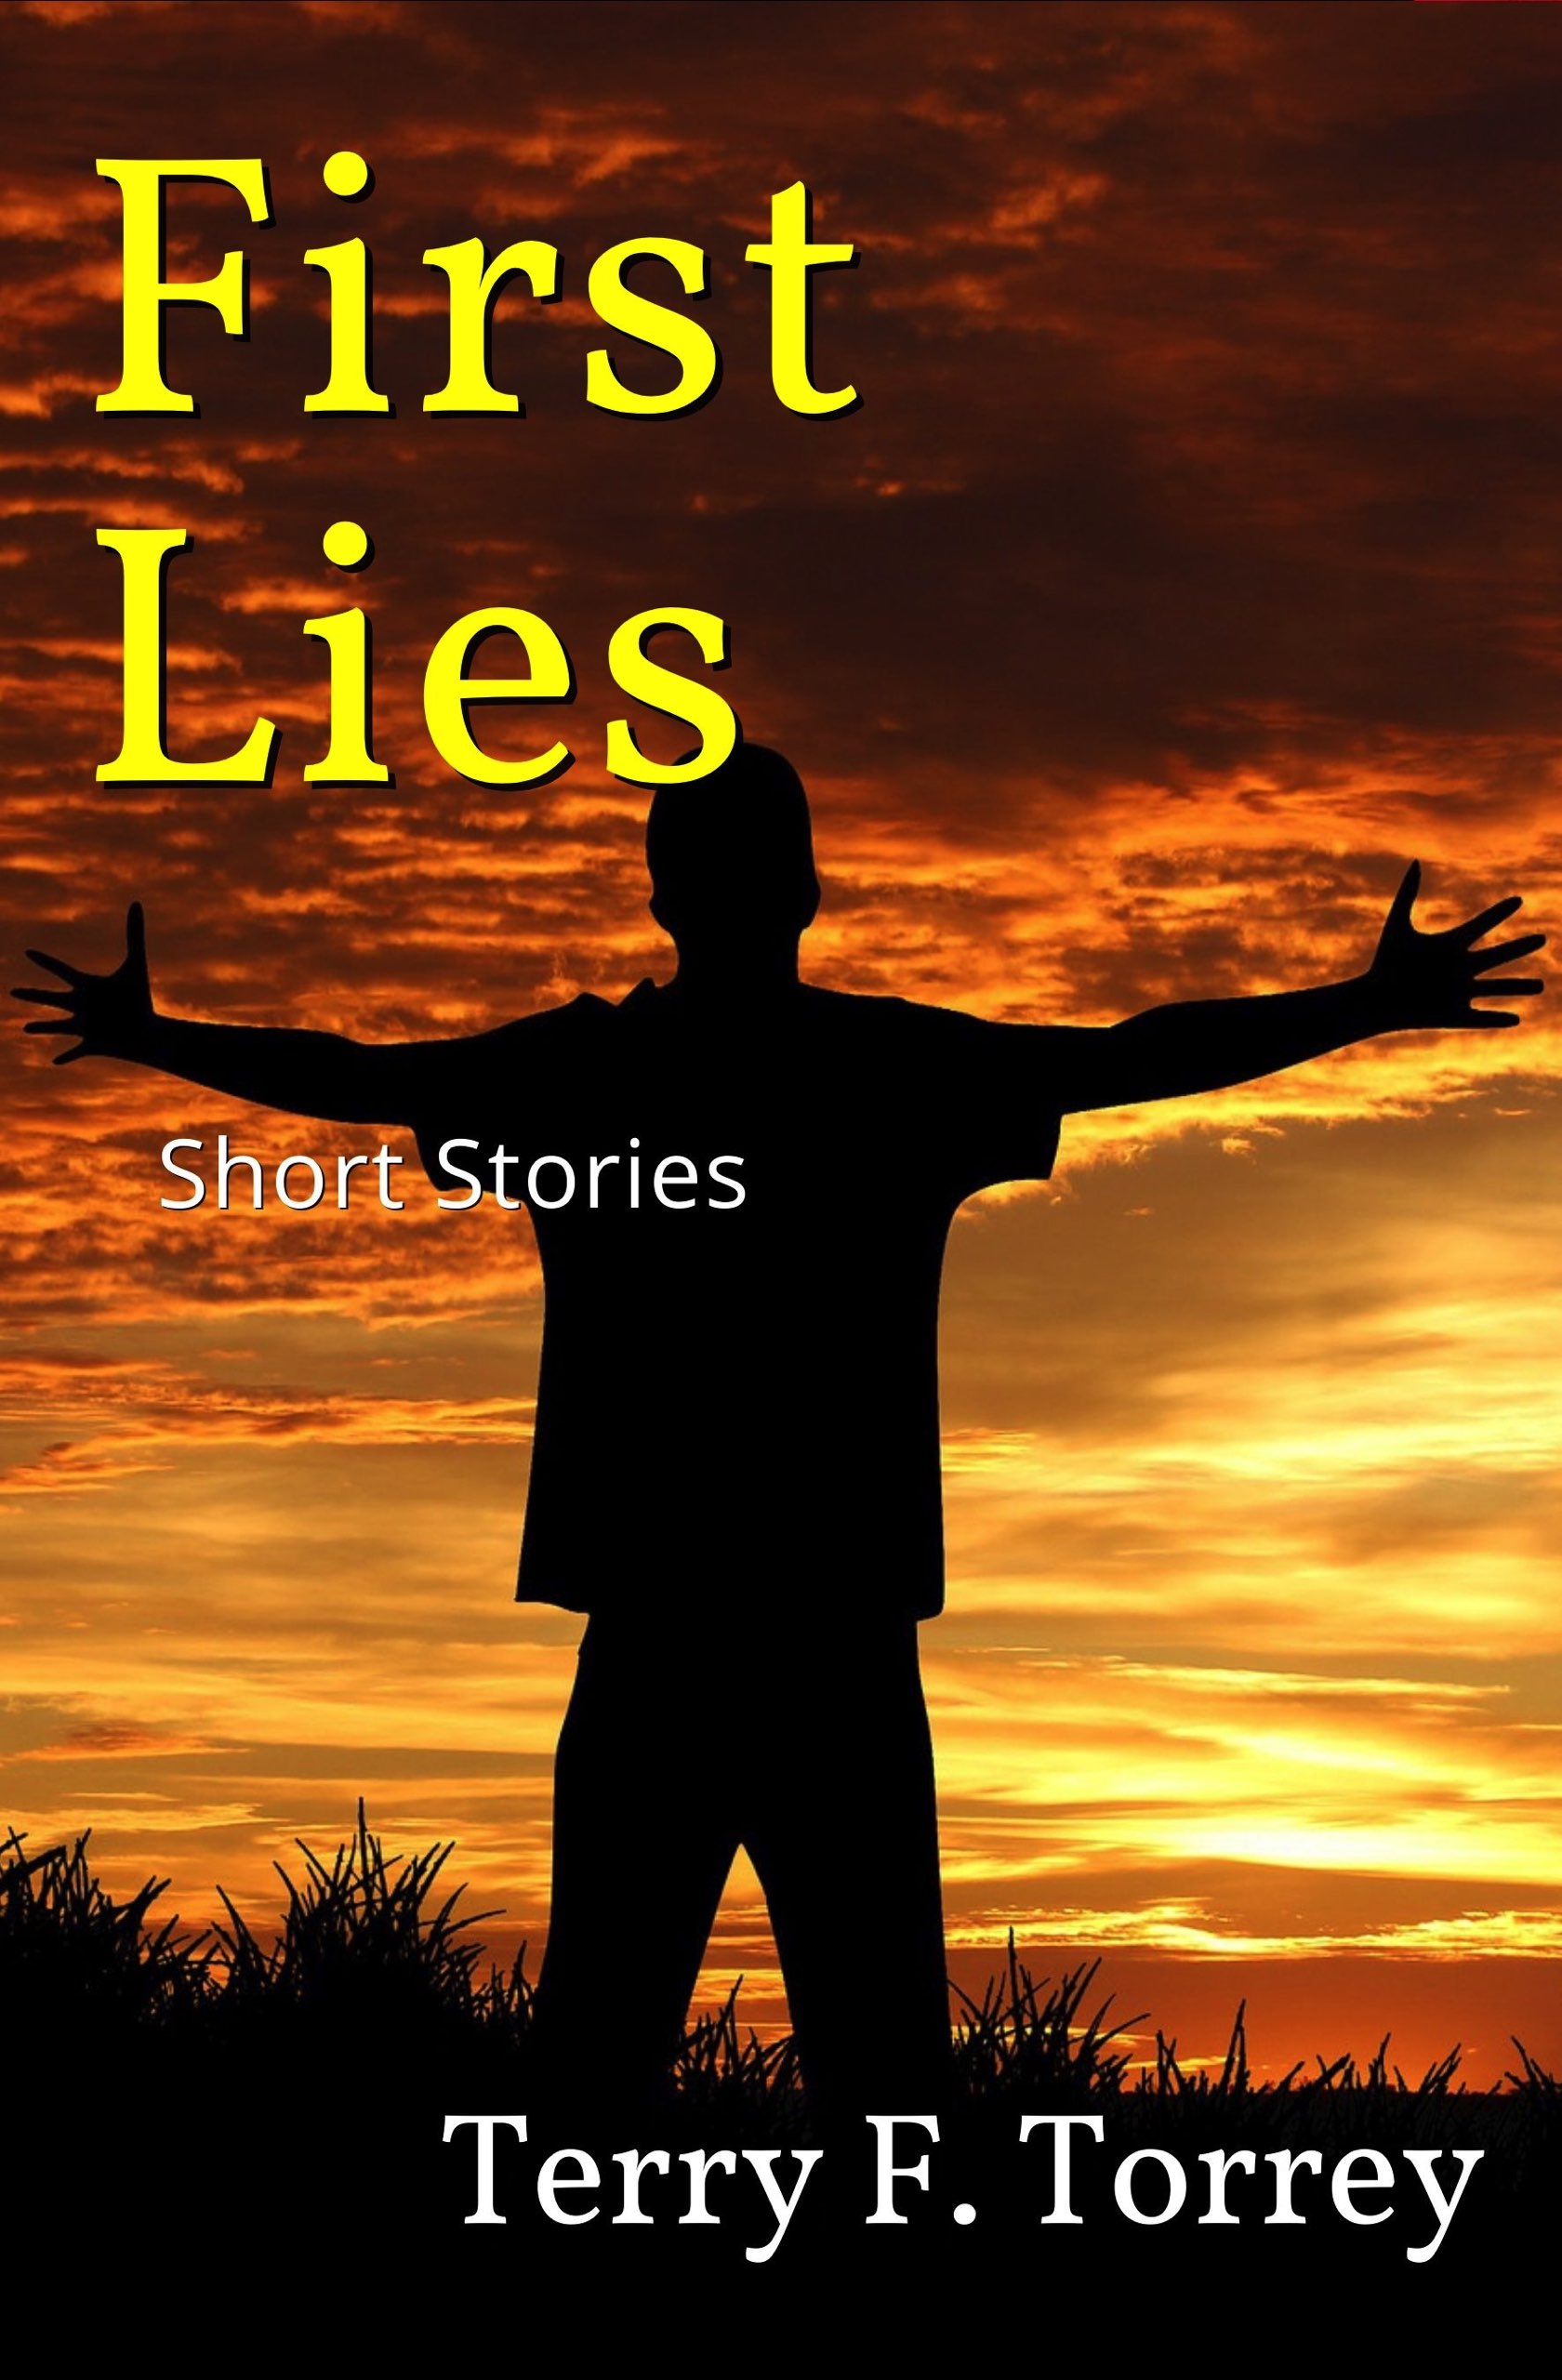 Cover of First Lies: Short Stories by Terry F. Torrey